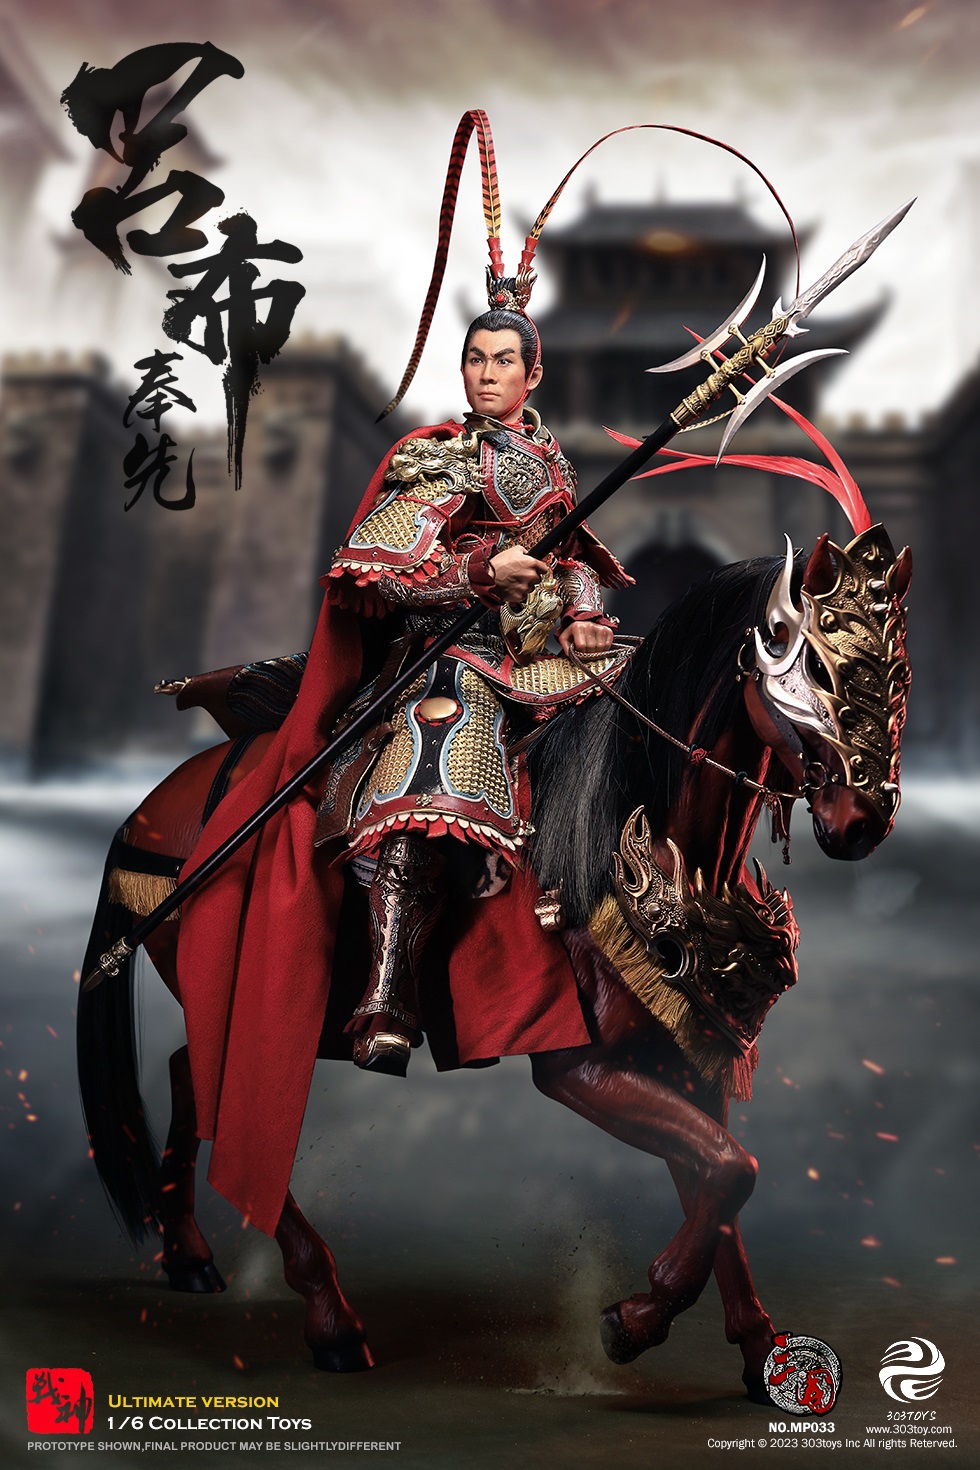 Fengxian - NEW PRODUCT: 303TOYS: MP031 1/6 THREE KINGDOMS - LV BU, FENGXIAN (standard copper, exclusive copper, 3 figure ultimate versions) & Red Rabbit (standard & exclusive versions) 21033010